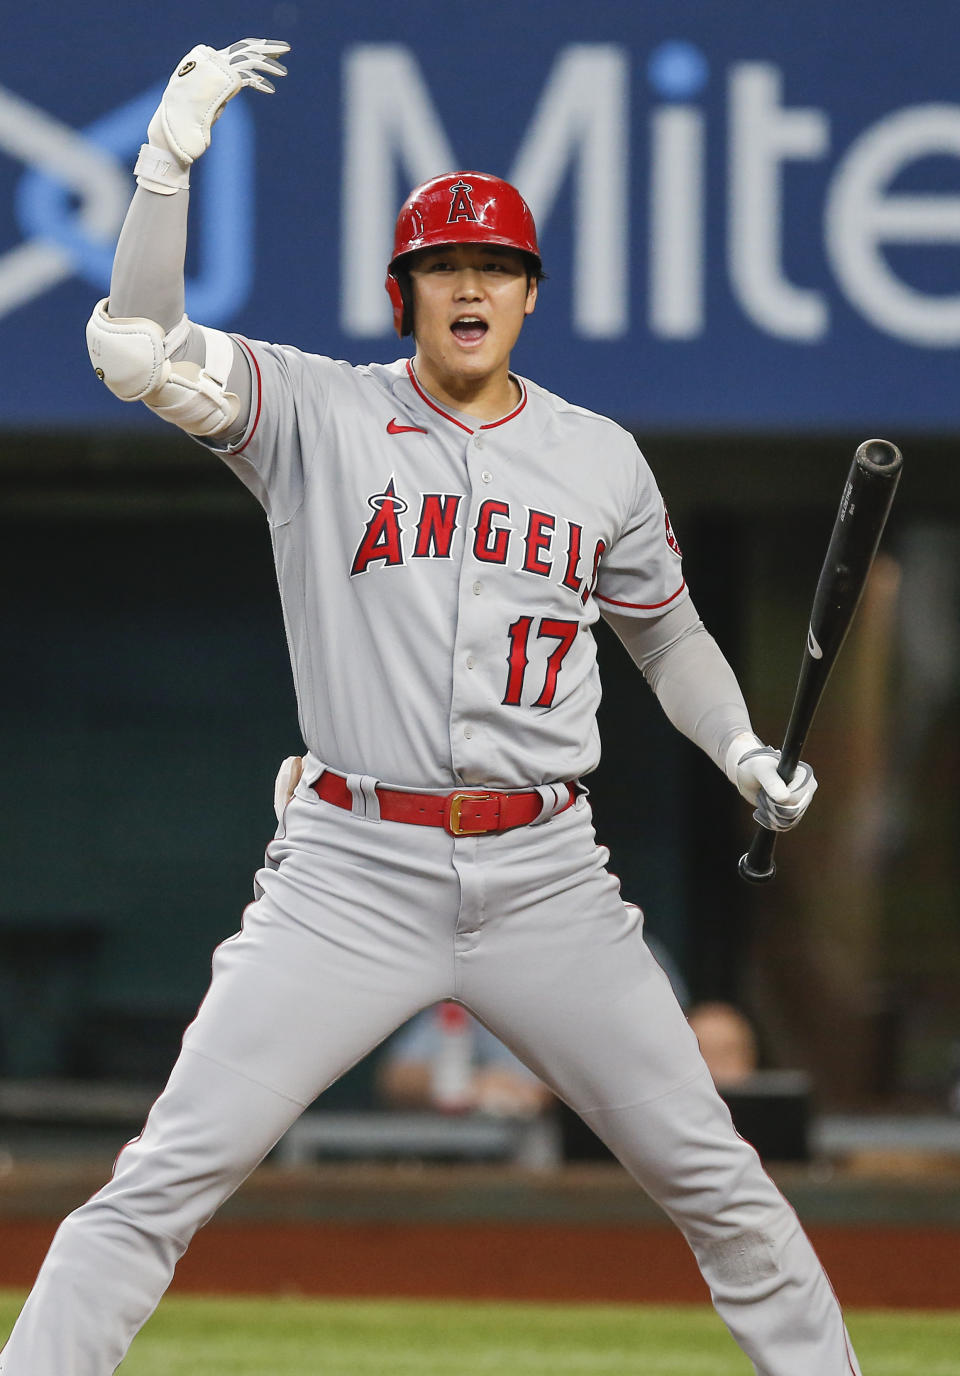 Los Angeles Angels designated hitter Shohei Ohtani (17) signals to Jack Mayfield to score a run from third on a wild pitch during the third inning of a baseball game against the Texas Rangers, Thursday, Aug. 5, 2021, in Arlington, Texas. (AP Photo/Brandon Wade)